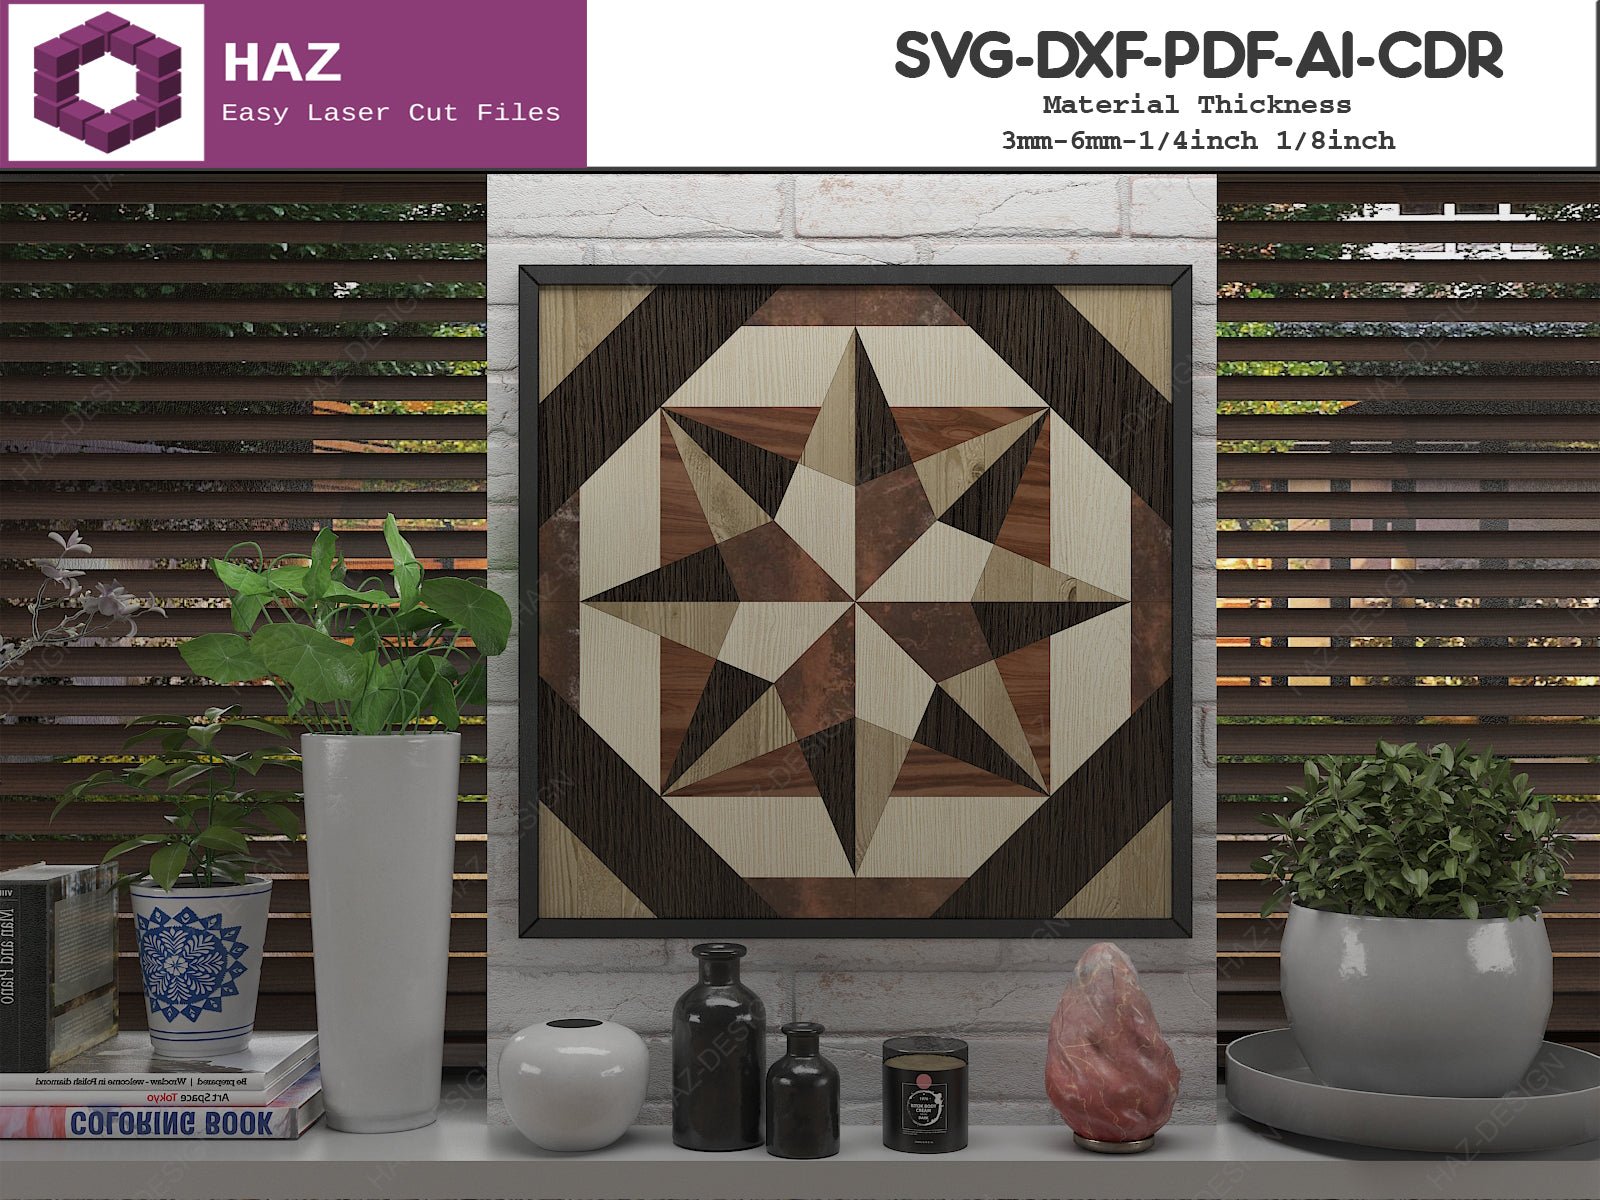 Wooden Wall Art Pattern / Barn Quilt Laser Files / Quilts Block Wall Decor / Wood Quilt Cuts / Geometric Design SVG DXF Ai CDR 077